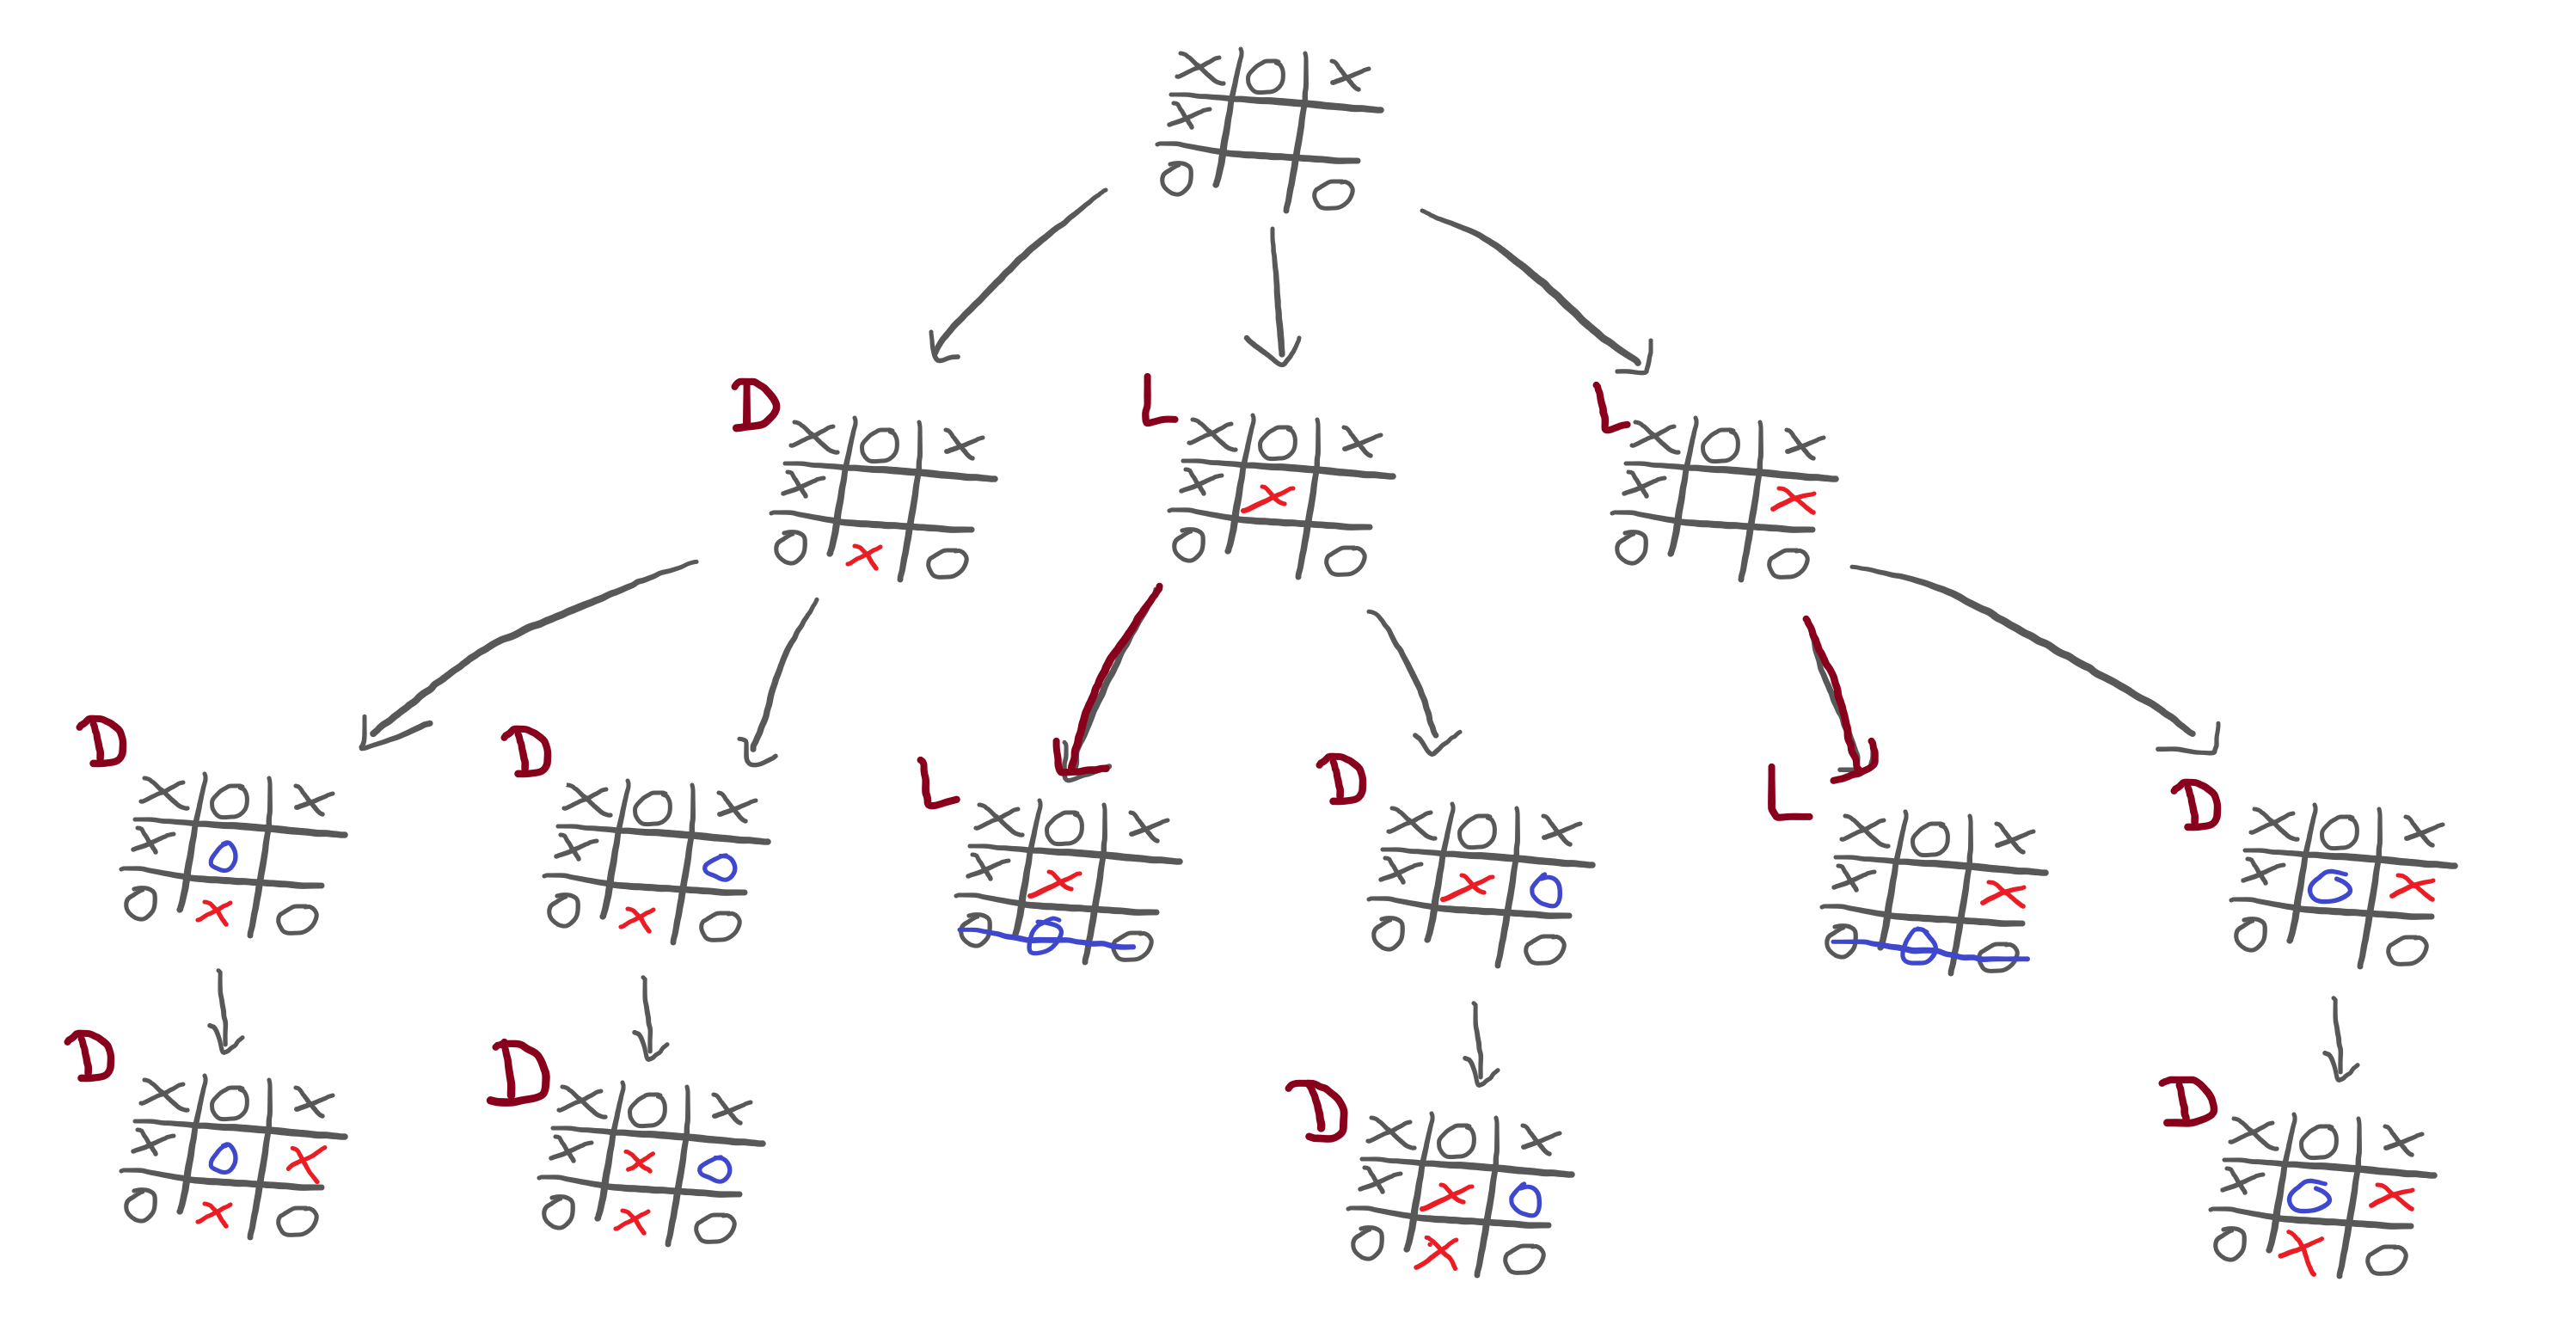 Game tree for Tic-Tac-Toe game using MiniMax algorithm.